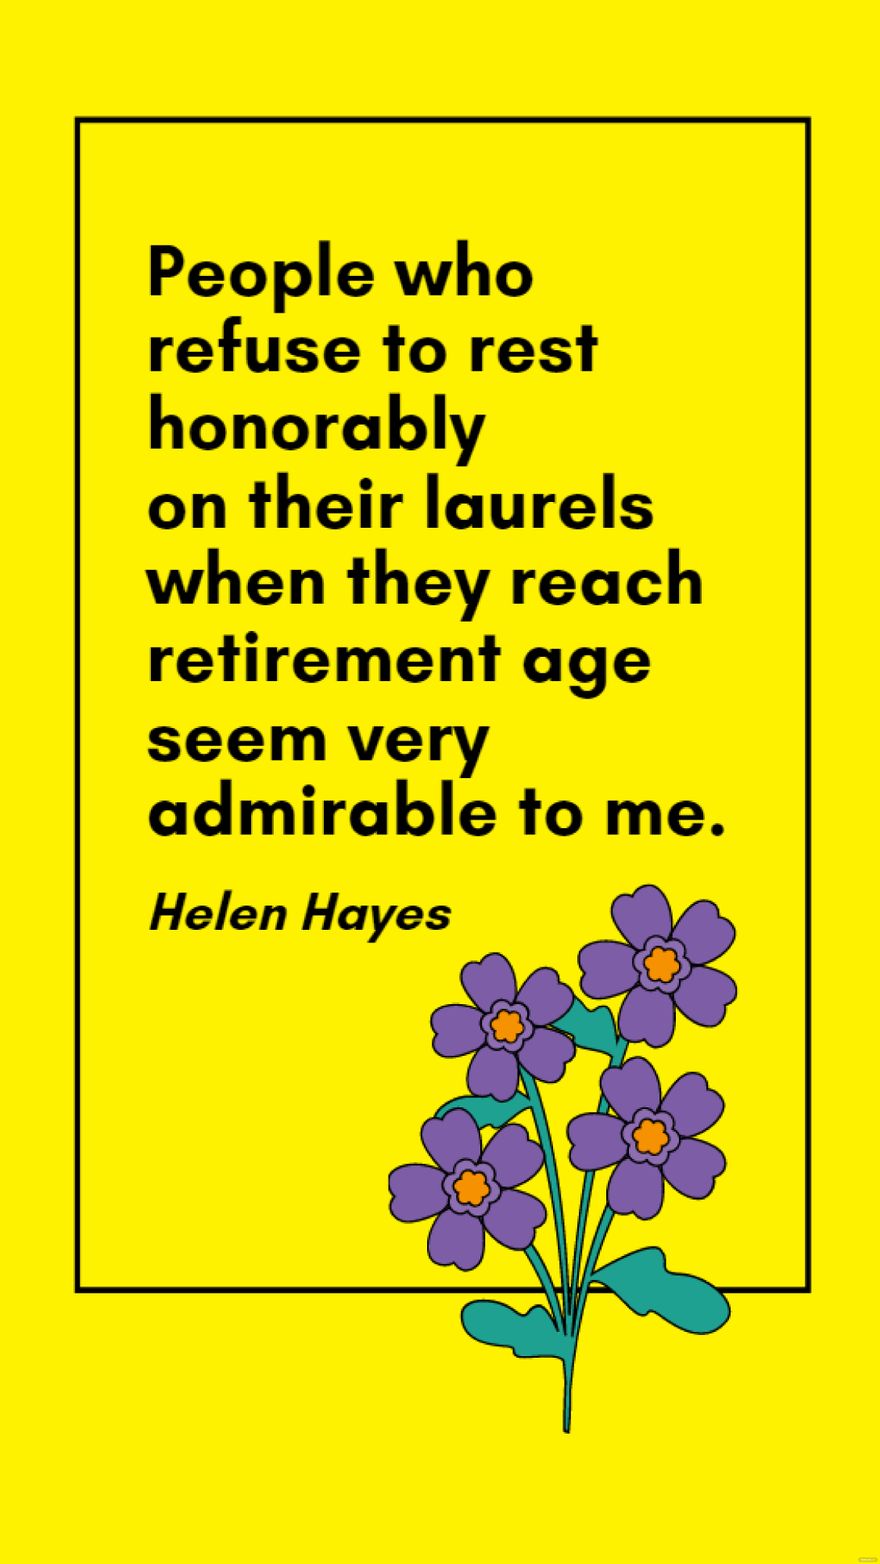 Helen Hayes - People who refuse to rest honorably on their laurels when they reach retirement age seem very admirable to me.